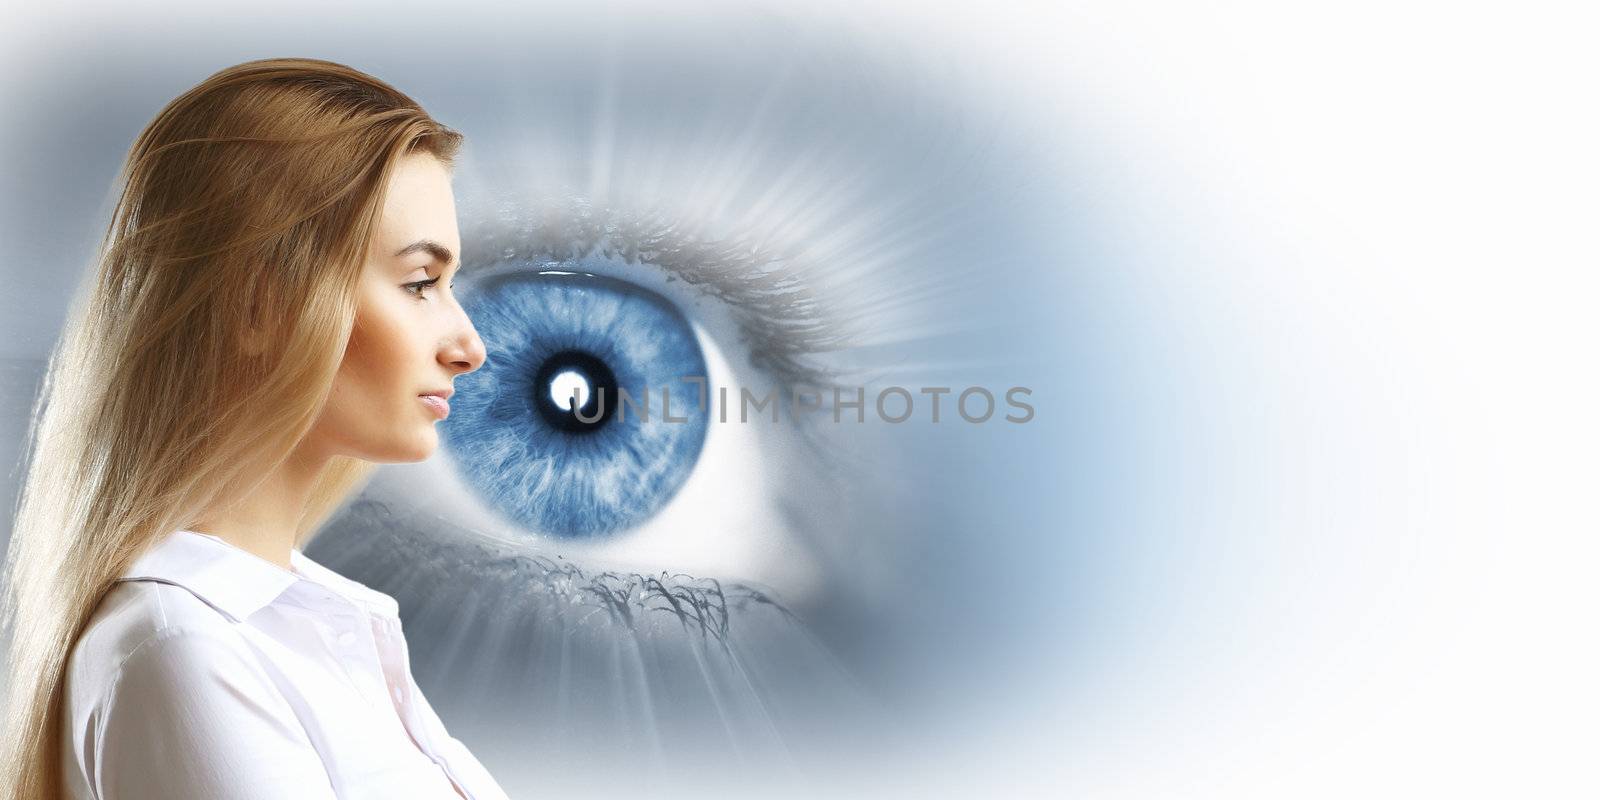 Human face and eye eye on white background